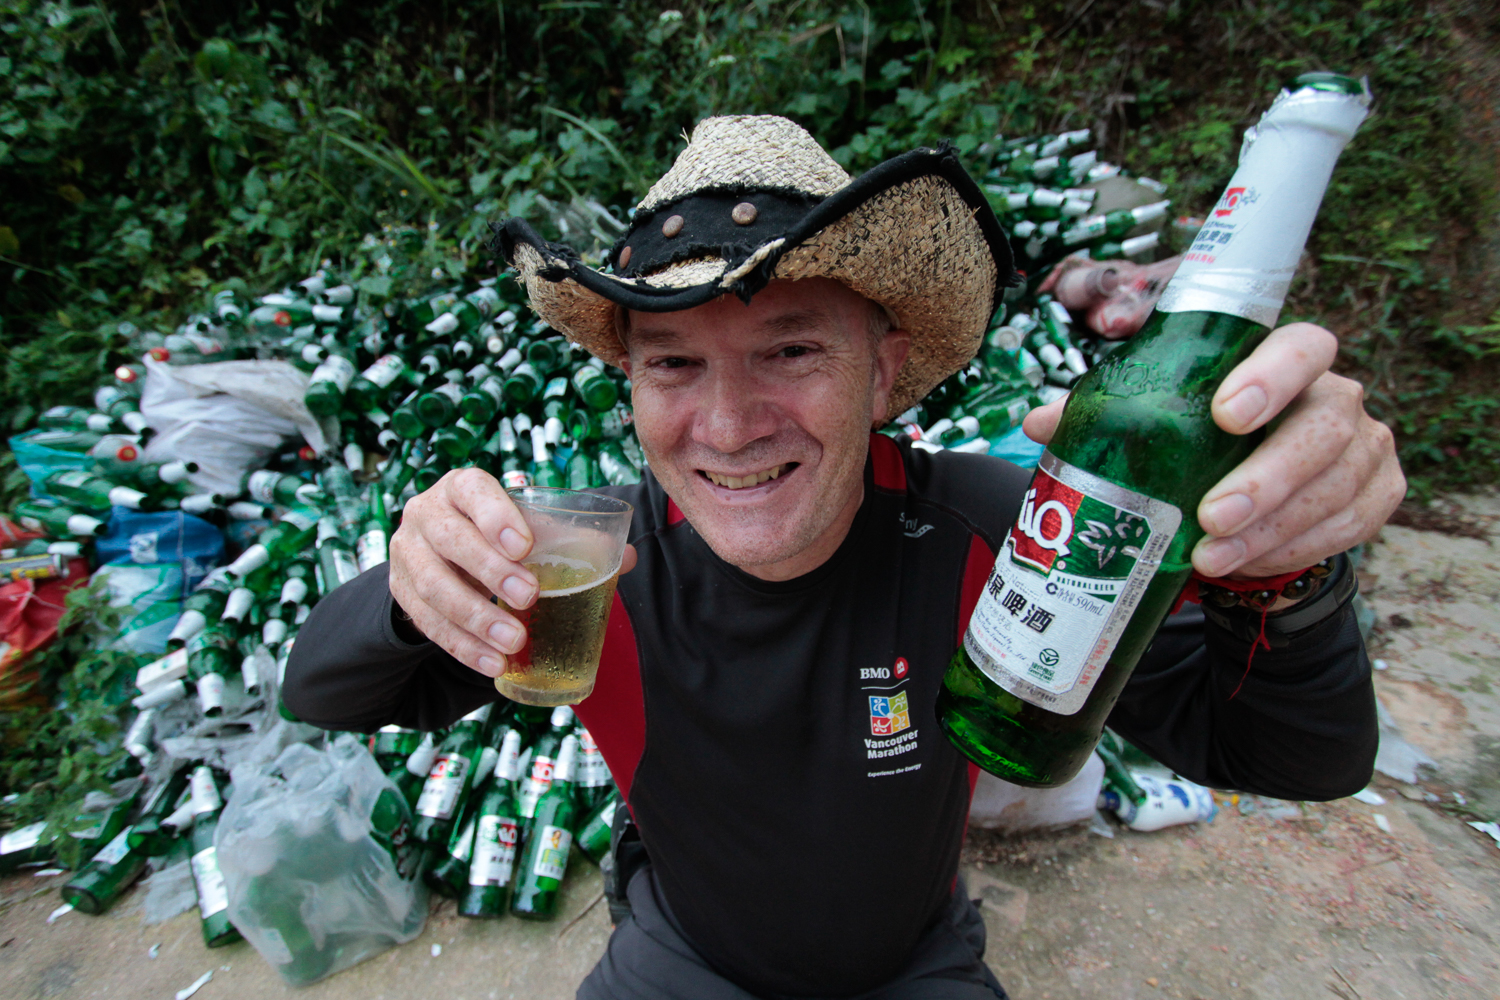 Brian with a LIQ beer after a long Rice Terraces hike (2010)